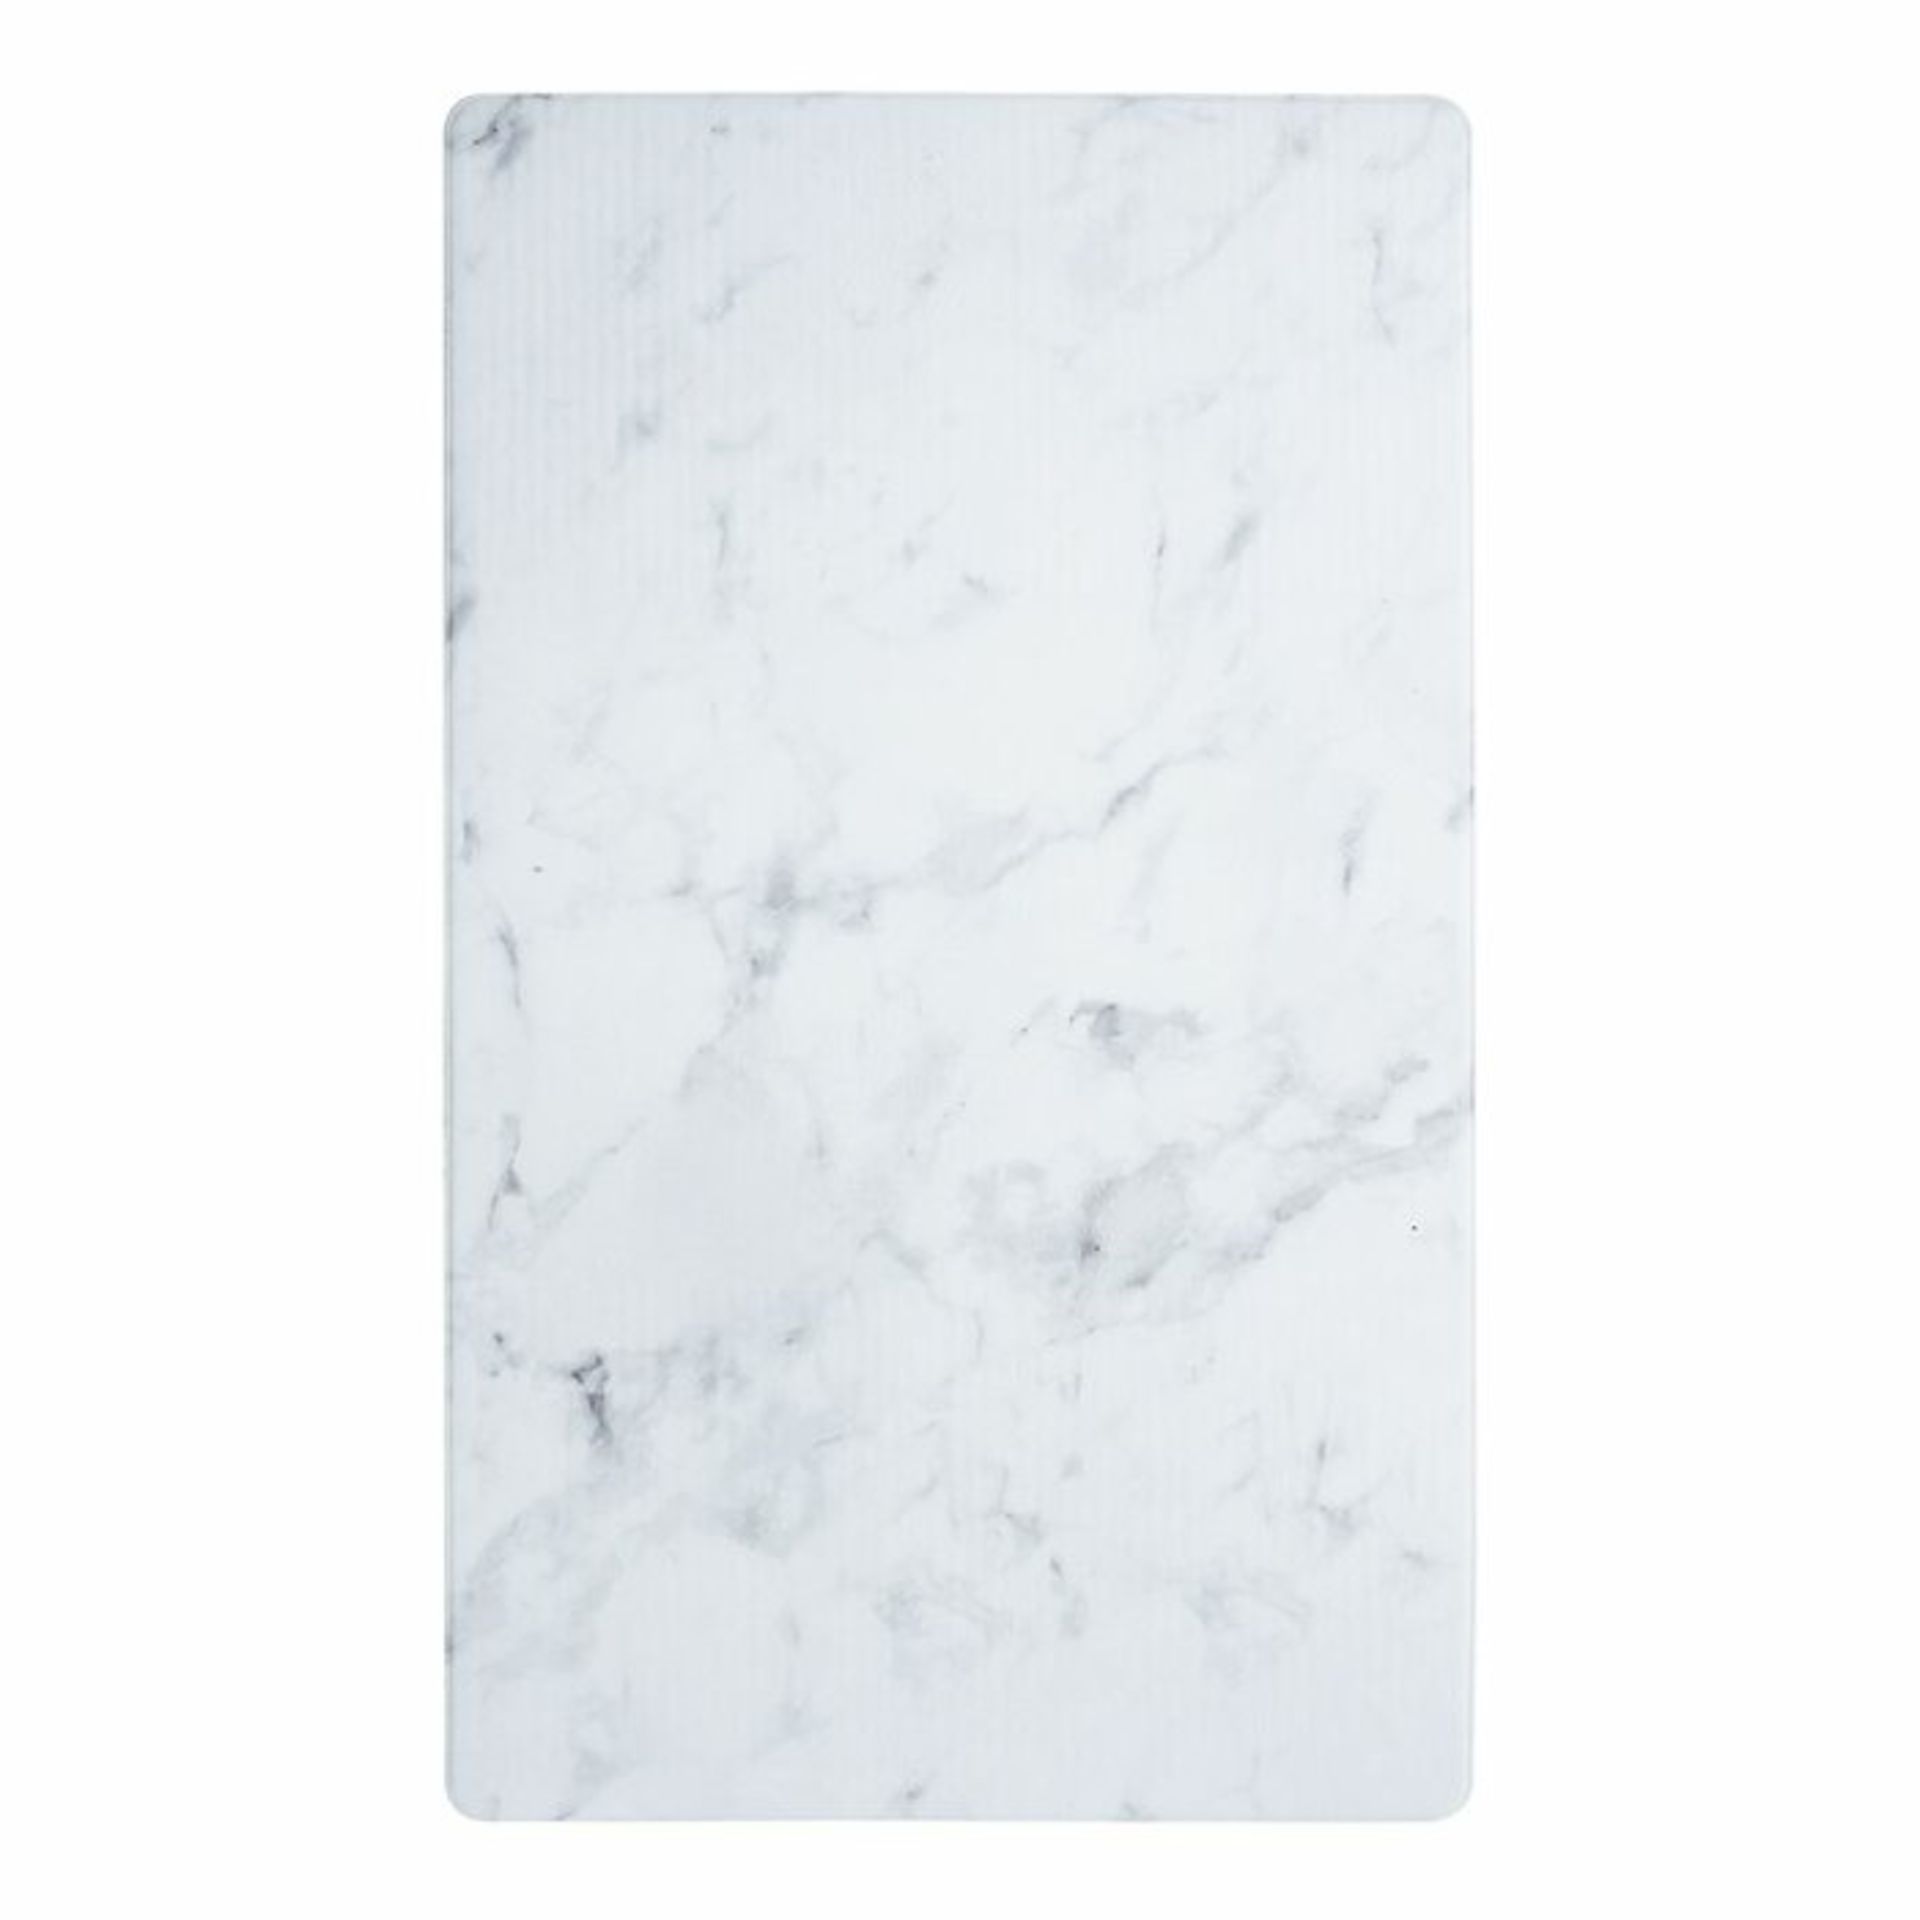 Stebbins Marble Tufted White Rug - RRP £25.99